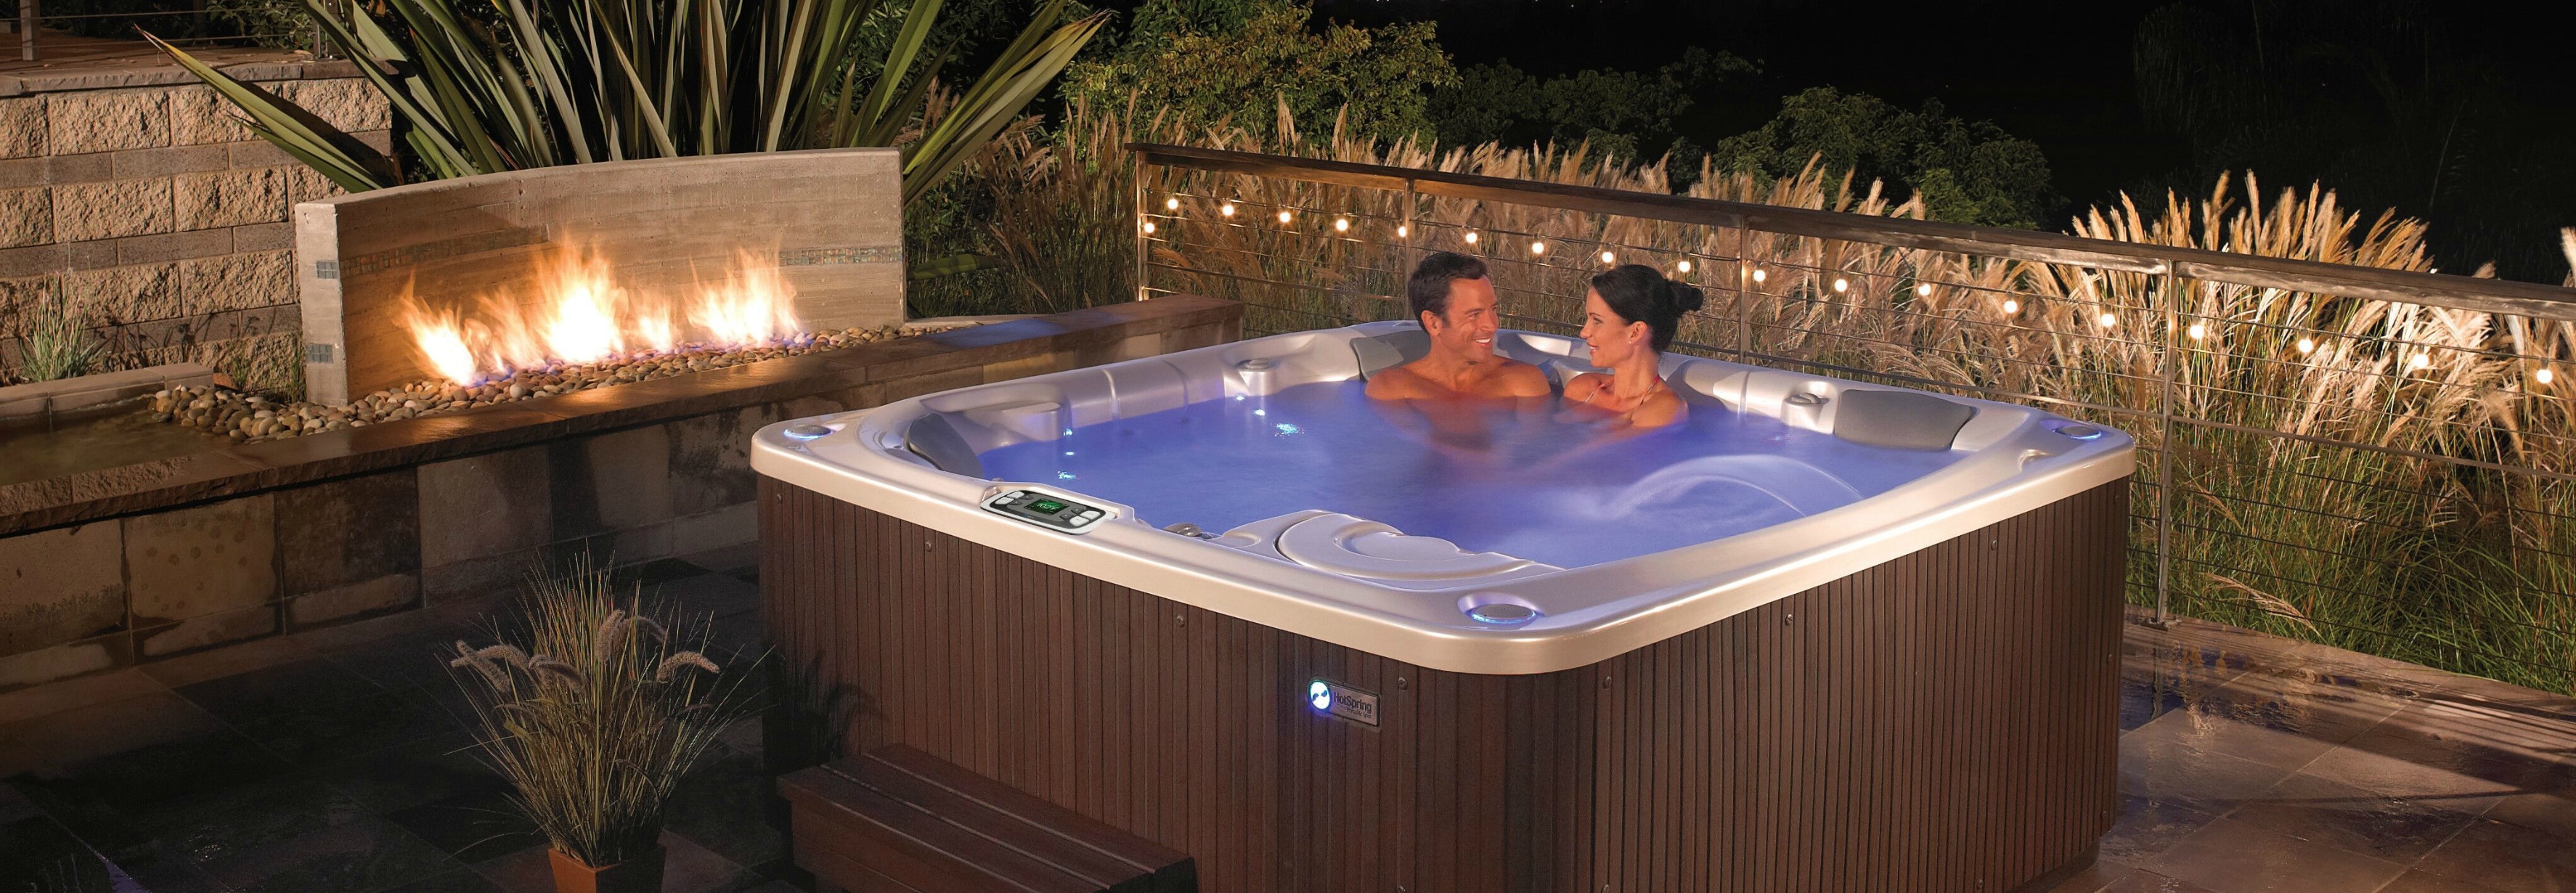 Whats The Difference Between A Jacuzzi And A Hot Tub Backyard Oasis